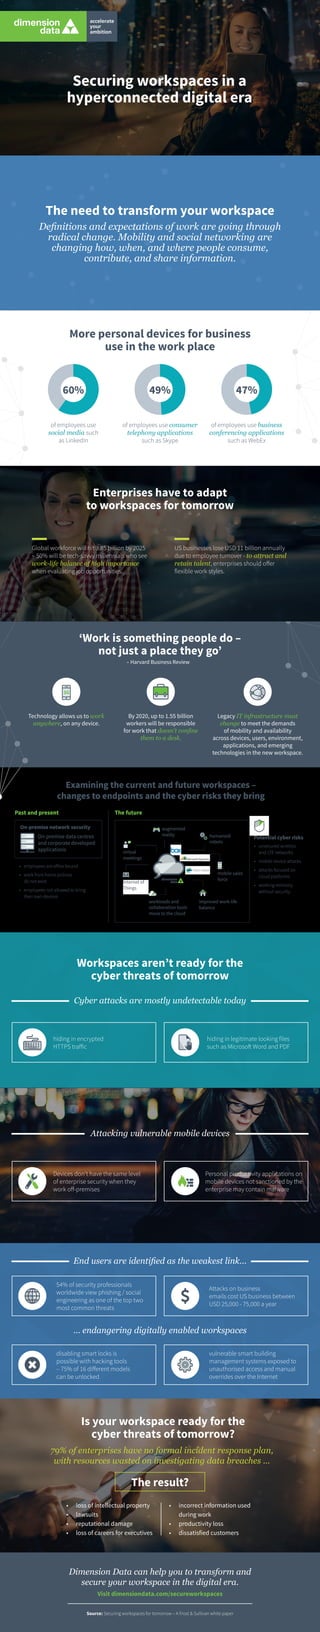 Enterprises have to adapt
to workspaces for tomorrow
Global workforce will hit 3.85 billion by 2025
– 50% will be tech-savvy millennials who see
work-life balance of high importance
when evaluating job opportunities.
US businesses lose USD 11 billion annually
due to employee turnover - to attract and
retain talent, enterprises should offer
flexible work styles.
Securing workspaces in a
hyperconnected digital era
The need to transform your workspace
Definitions and expectations of work are going through
radical change. Mobility and social networking are
changing how, when, and where people consume,
contribute, and share information.
More personal devices for business
use in the work place
60%
of employees use
social media such
as LinkedIn
of employees use consumer
telephony applications
such as Skype
of employees use business
conferencing applications
such as WebEx
49% 47%
‘Work is something people do –
not just a place they go’
Examining the current and future workspaces –
changes to endpoints and the cyber risks they bring
Technology allows us to work
anywhere, on any device.
By 2020, up to 1.55 billion
workers will be responsible
for work that doesn’t confine
them to a desk.
Legacy IT infrastructure must
change to meet the demands
of mobility and availability
across devices, users, environment,
applications, and emerging
technologies in the new workspace.
– Harvard Business Review
79% of enterprises have no formal incident response plan,
with resources wasted on investigating data breaches …
Dimension Data can help you to transform and
secure your workspace in the digital era.
•	 loss of intellectual property
•	 lawsuits
•	 reputational damage
•	 loss of careers for executives
Visit dimensiondata.com/secureworkspaces
Source: Securing workspaces for tomorrow – A Frost & Sullivan white paper
•	 incorrect information used
during work
•	 productivity loss
•	 dissatisfied customers
hiding in legitimate looking files
such as Microsoft Word and PDF
Workspaces aren’t ready for the
cyber threats of tomorrow
Cyber attacks are mostly undetectable today
hiding in encrypted
HTTPS traffic
End users are identified as the weakest link…
… endangering digitally enabled workspaces
54% of security professionals
worldwide view phishing / social
engineering as one of the top two
most common threats
disabling smart locks is
possible with hacking tools
– 75% of 16 different models
can be unlocked
Attacks on business
emails cost US business between
USD 25,000 - 75,000 a year
vulnerable smart building
management systems exposed to
unauthorised access and manual
overrides over the Internet
Attacking vulnerable mobile devices
Devices don’t have the same level
of enterprise security when they
work off-premises
Personal productivity applications on
mobile devices not sanctioned by the
enterprise may contain malware
Is your workspace ready for the
cyber threats of tomorrow?
The result?
Past and present The future
•	 employees are office bound
•	 work from home policies 	
do not exist
•	 employees not allowed to bring
their own devices
On-premise network security
On-premise data centres
and corporate developed
applications
Potential cyber risks
•	 unsecured wireless
and LTE networks
•	 mobile device attacks
•	 attacks focused on
cloud platforms
•	 working remotely
without security
workloads and
collaboration tools
move to the cloud
improved work-life
balance
Internet of
Things
augmented
reality
mobile sales
force
virtual
meetings
humanoid
robots
 